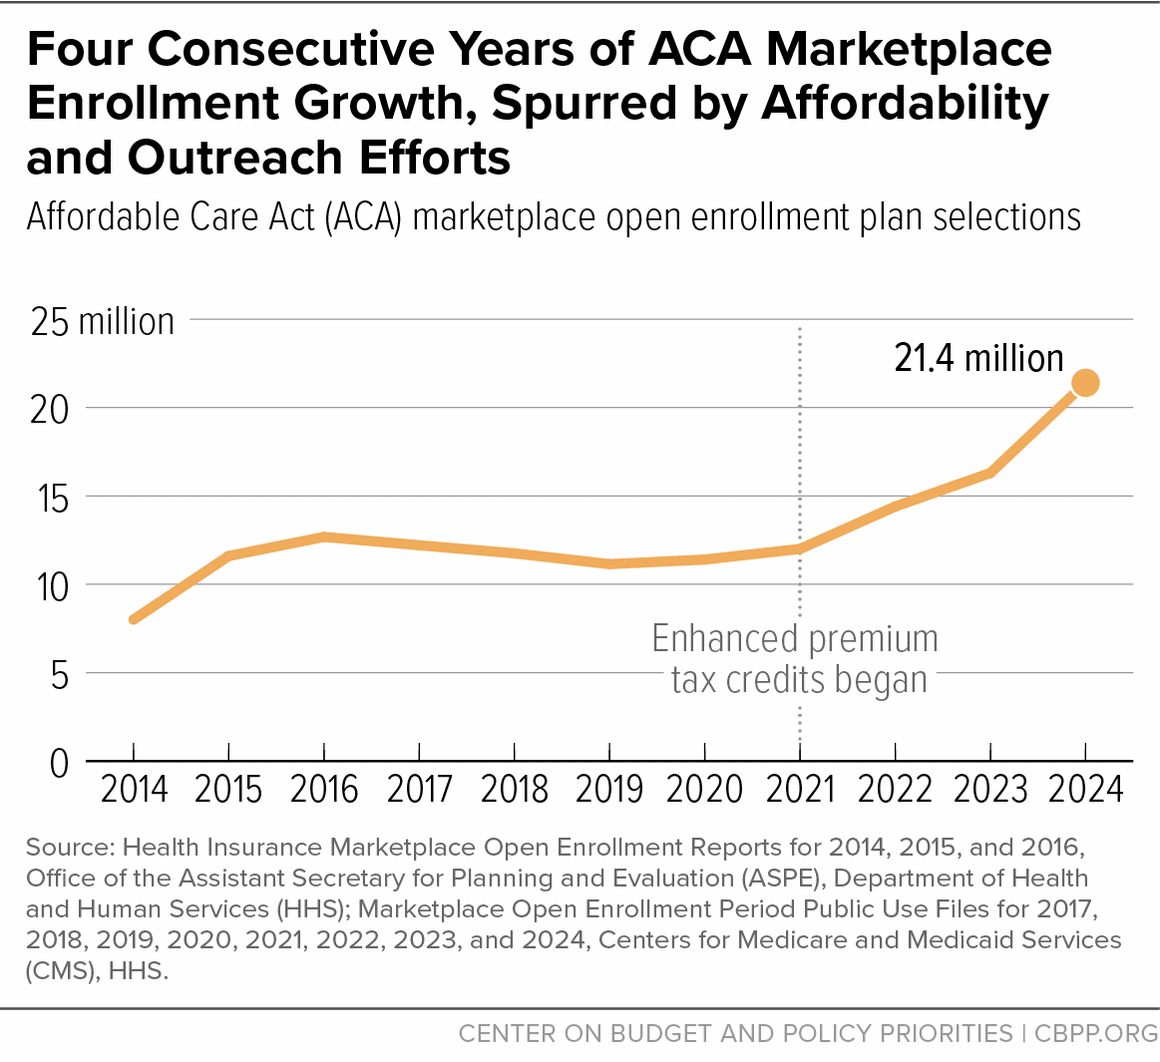 Four Consecutive Years of ACA Marketplace Enrollment Growth, Spurred by Affordability and Outreach Efforts